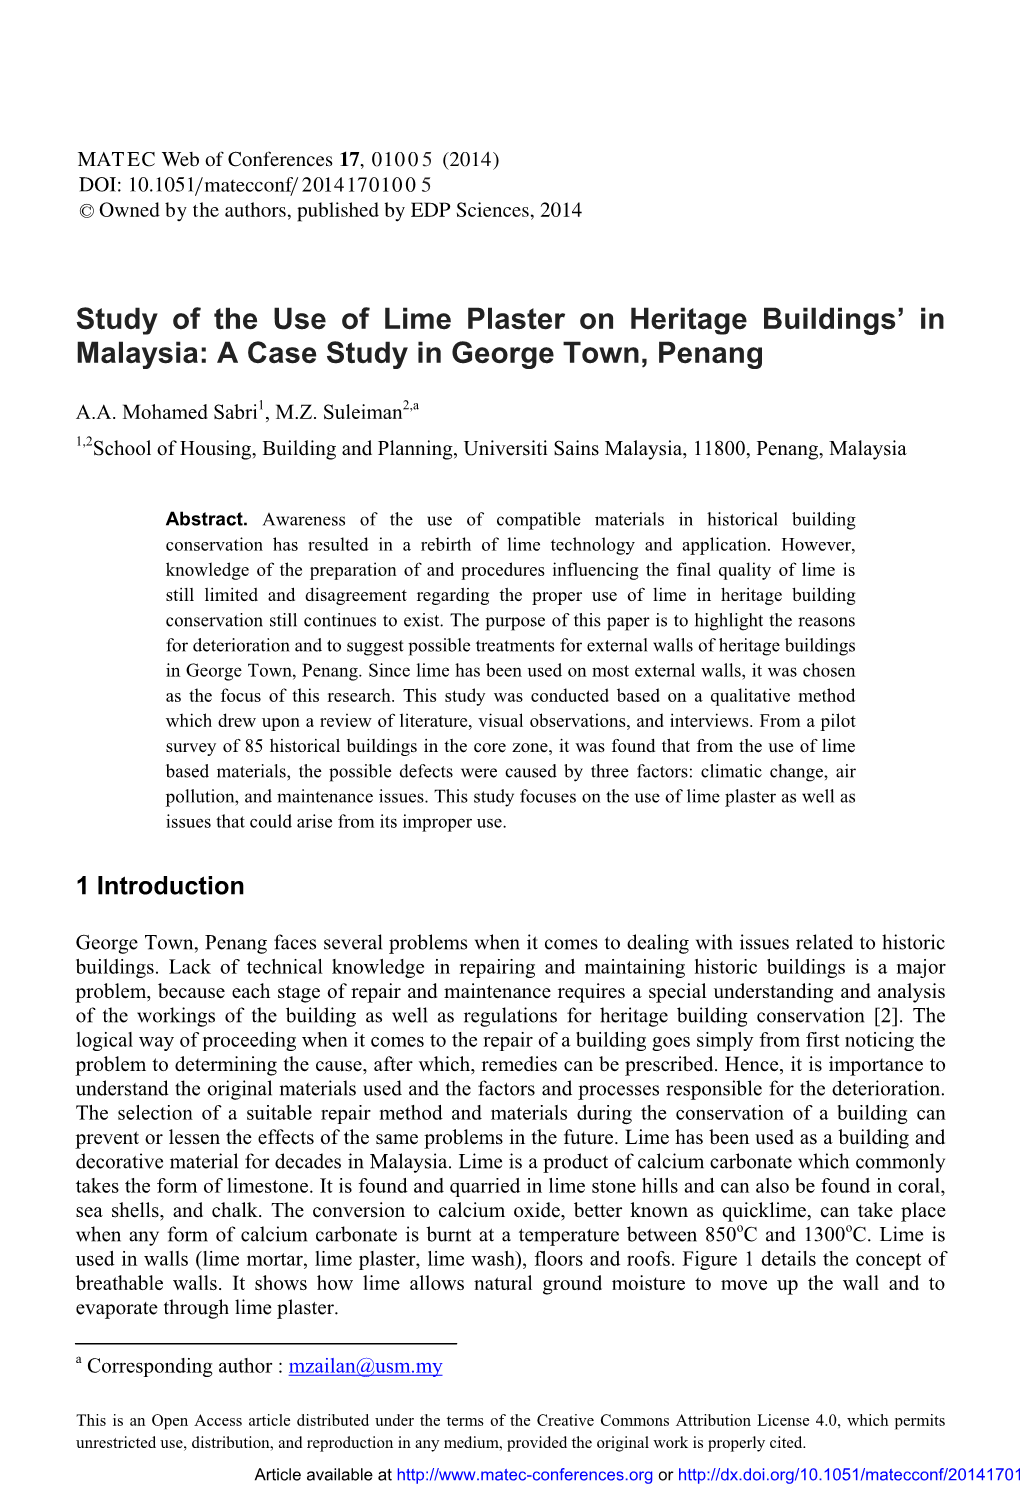 Study of the Use of Lime Plaster on Heritage Buildings' in Malaysia